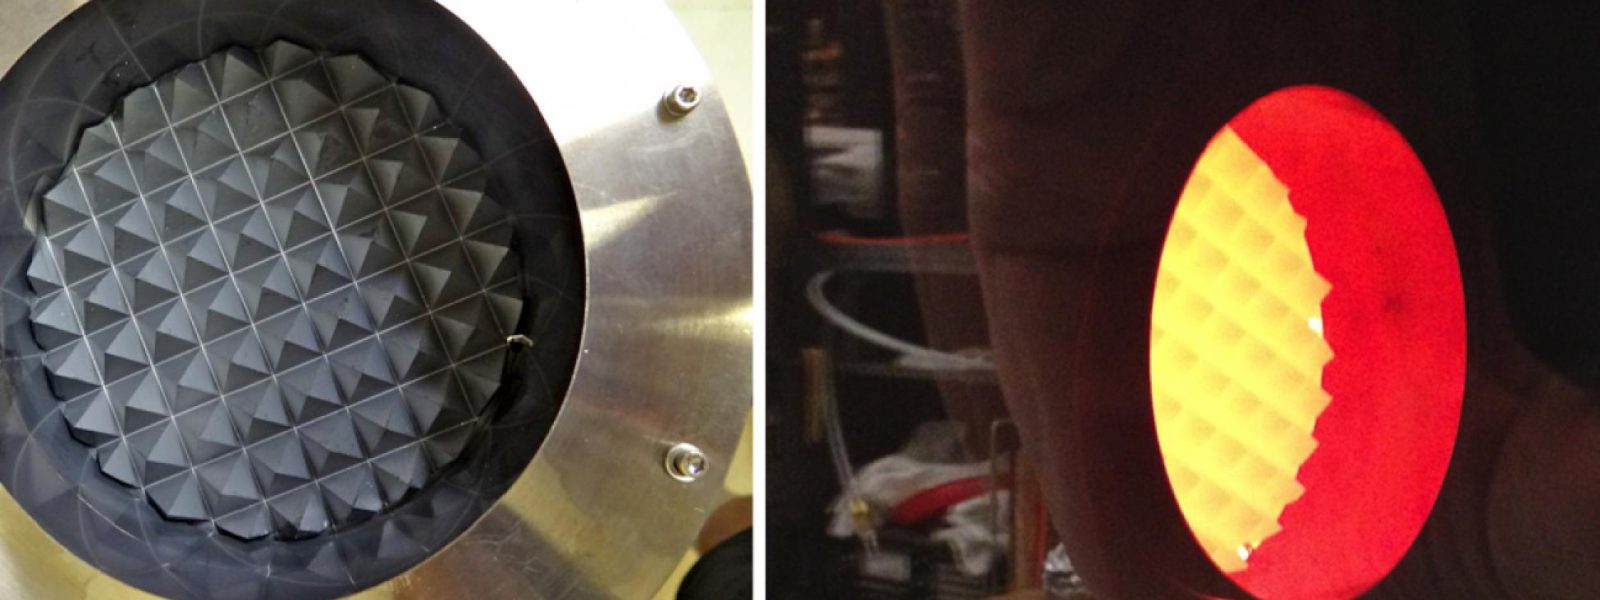 A silicon carbide disc machined with a pyramid pattern (left) is heated to well over 800° C (right) as part of electron cyclotron emission calibration testing at the University of Texas at Austin.